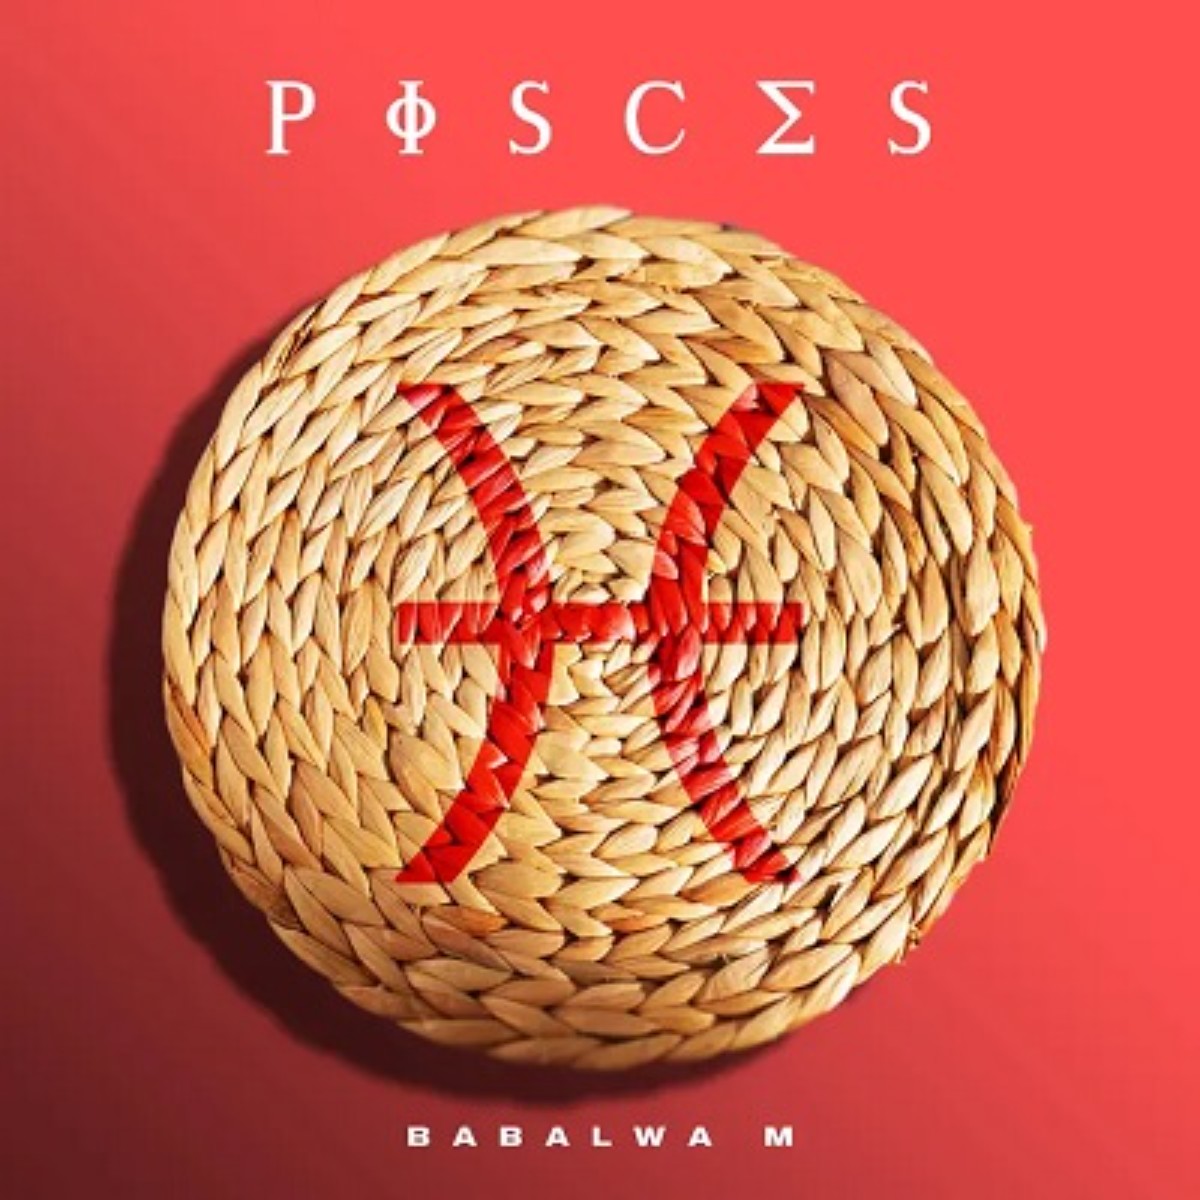 Download Babalwa M Pisces EP Hiphop